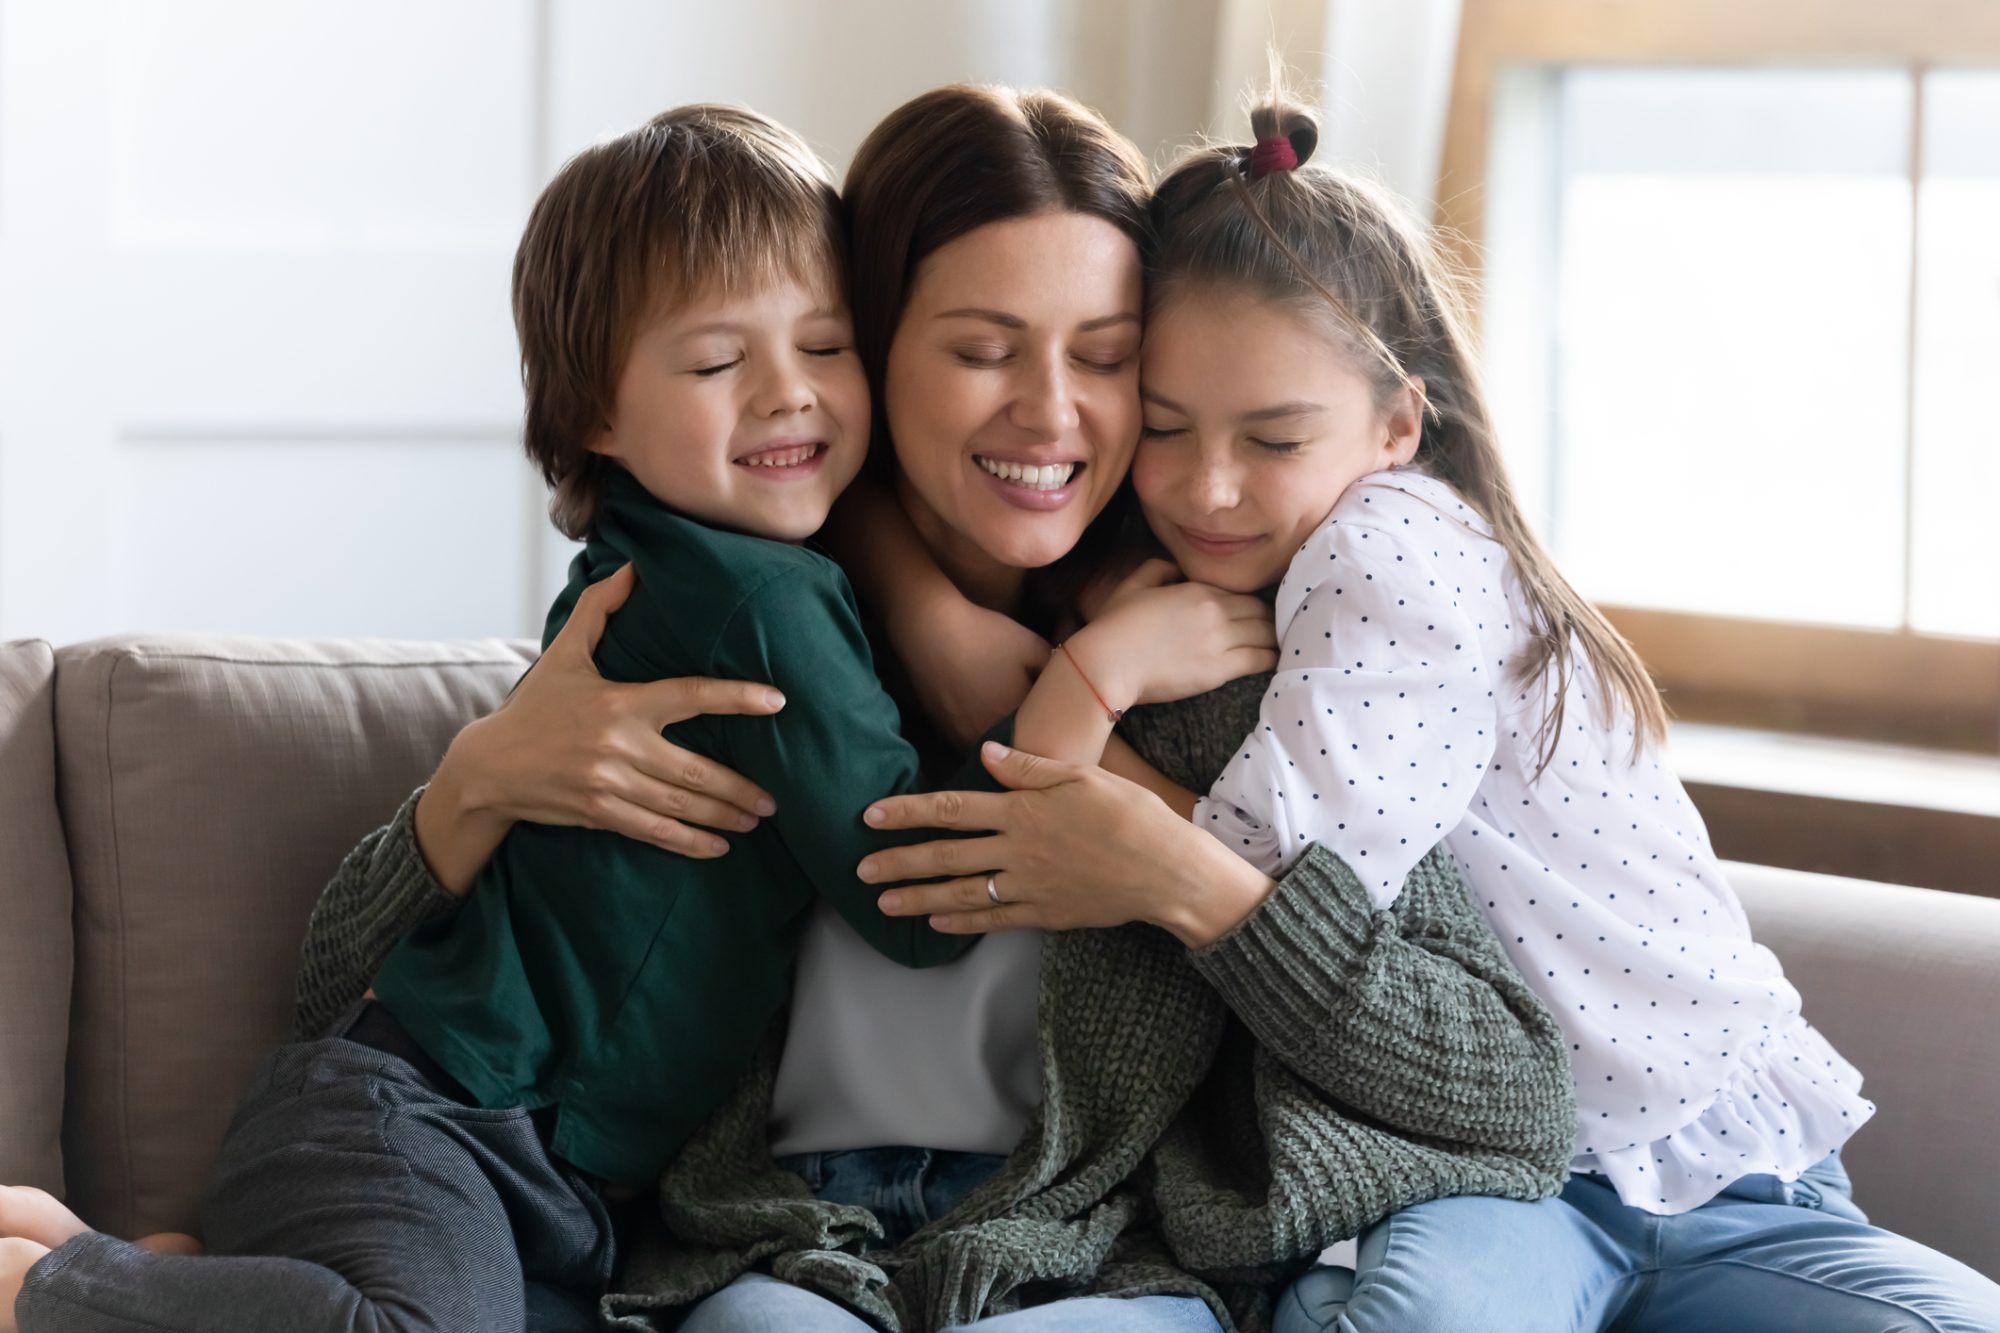 Affectionate small children embracing young mother, missing her after long separation. Loving mommy nanny babysitter cuddling little kids, relaxing together on comfortable couch in living room.